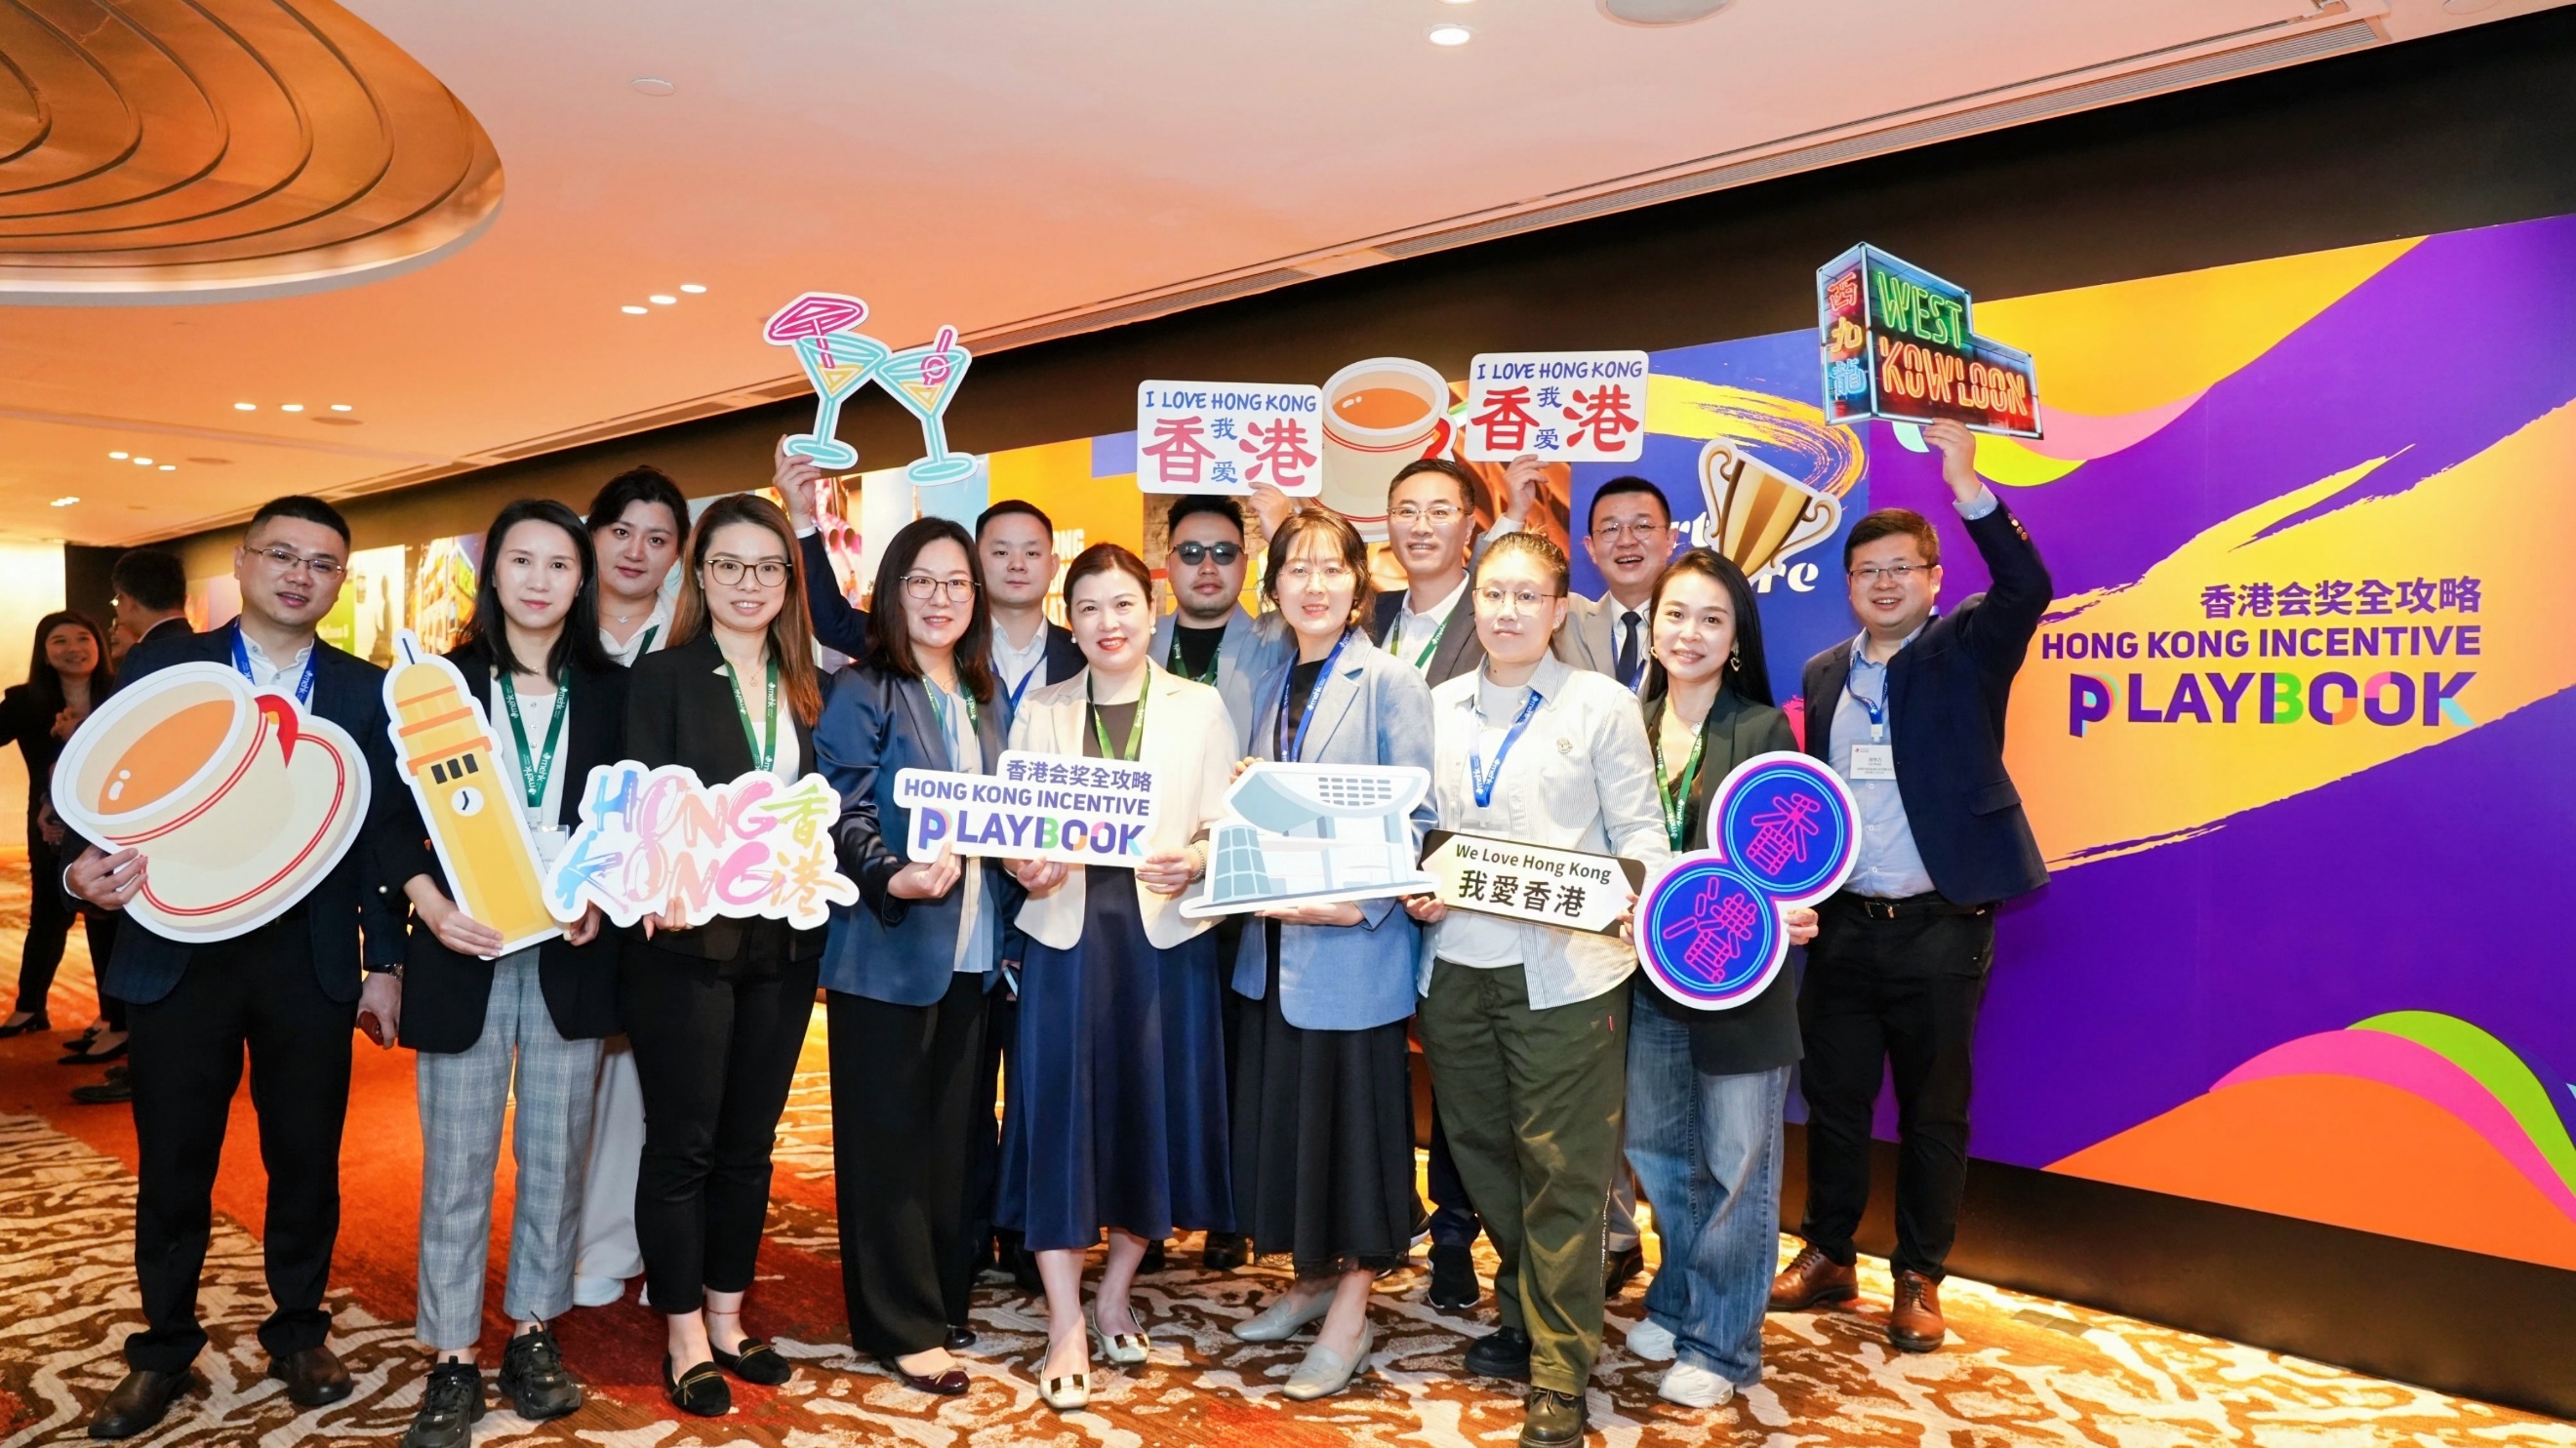 Hong Kong Incentive Playbook Launch and Top Agents Celebration